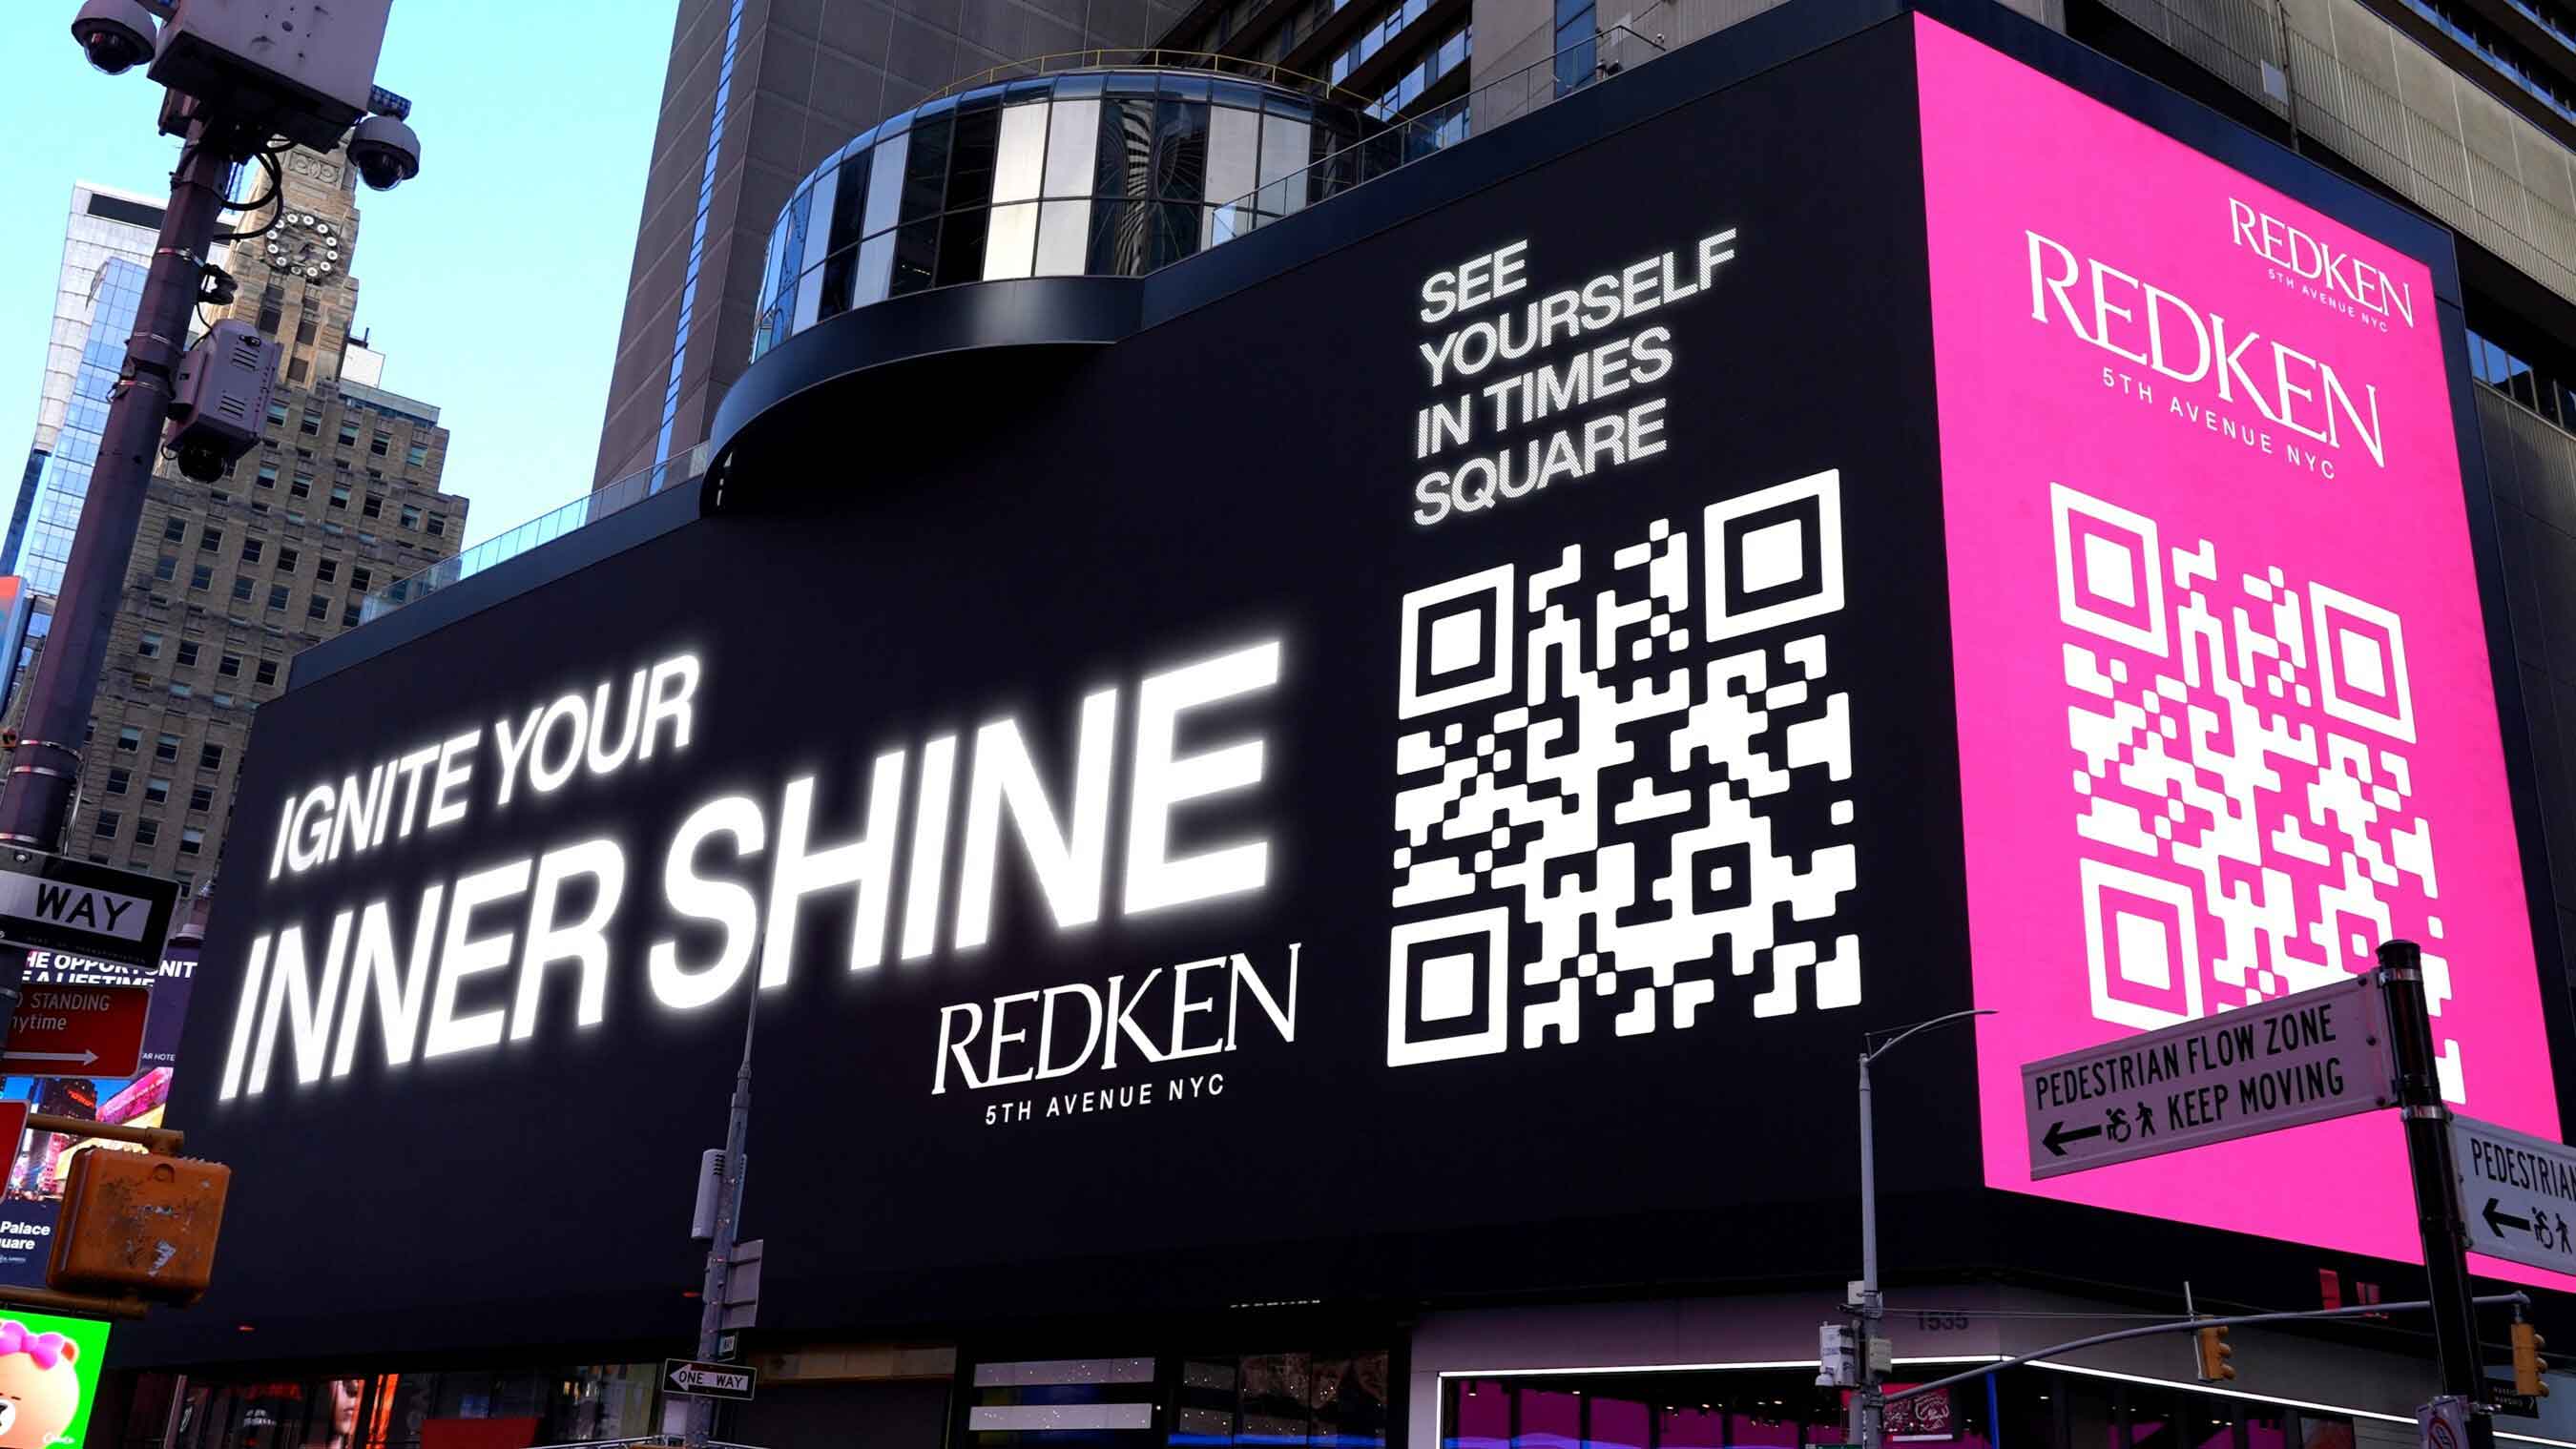 Redken OOH campaign with intractable QR code at Times Square, New York